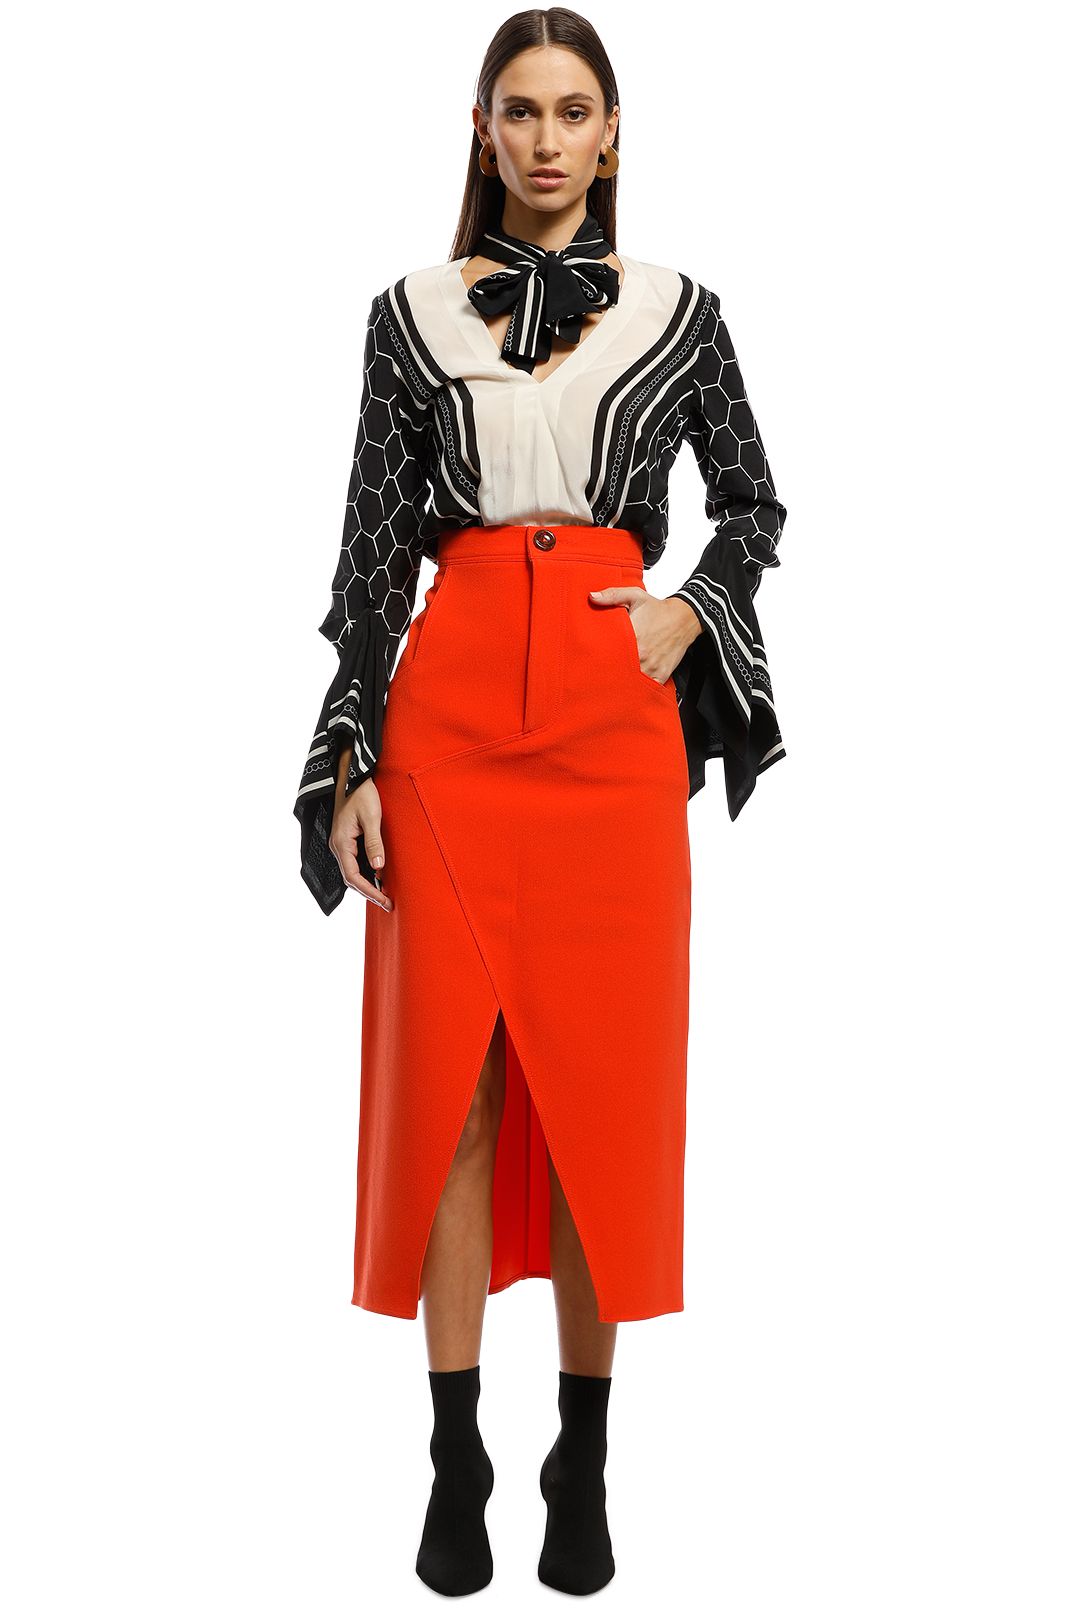 CMEO Collective - High Heart Skirt - Orange - Front